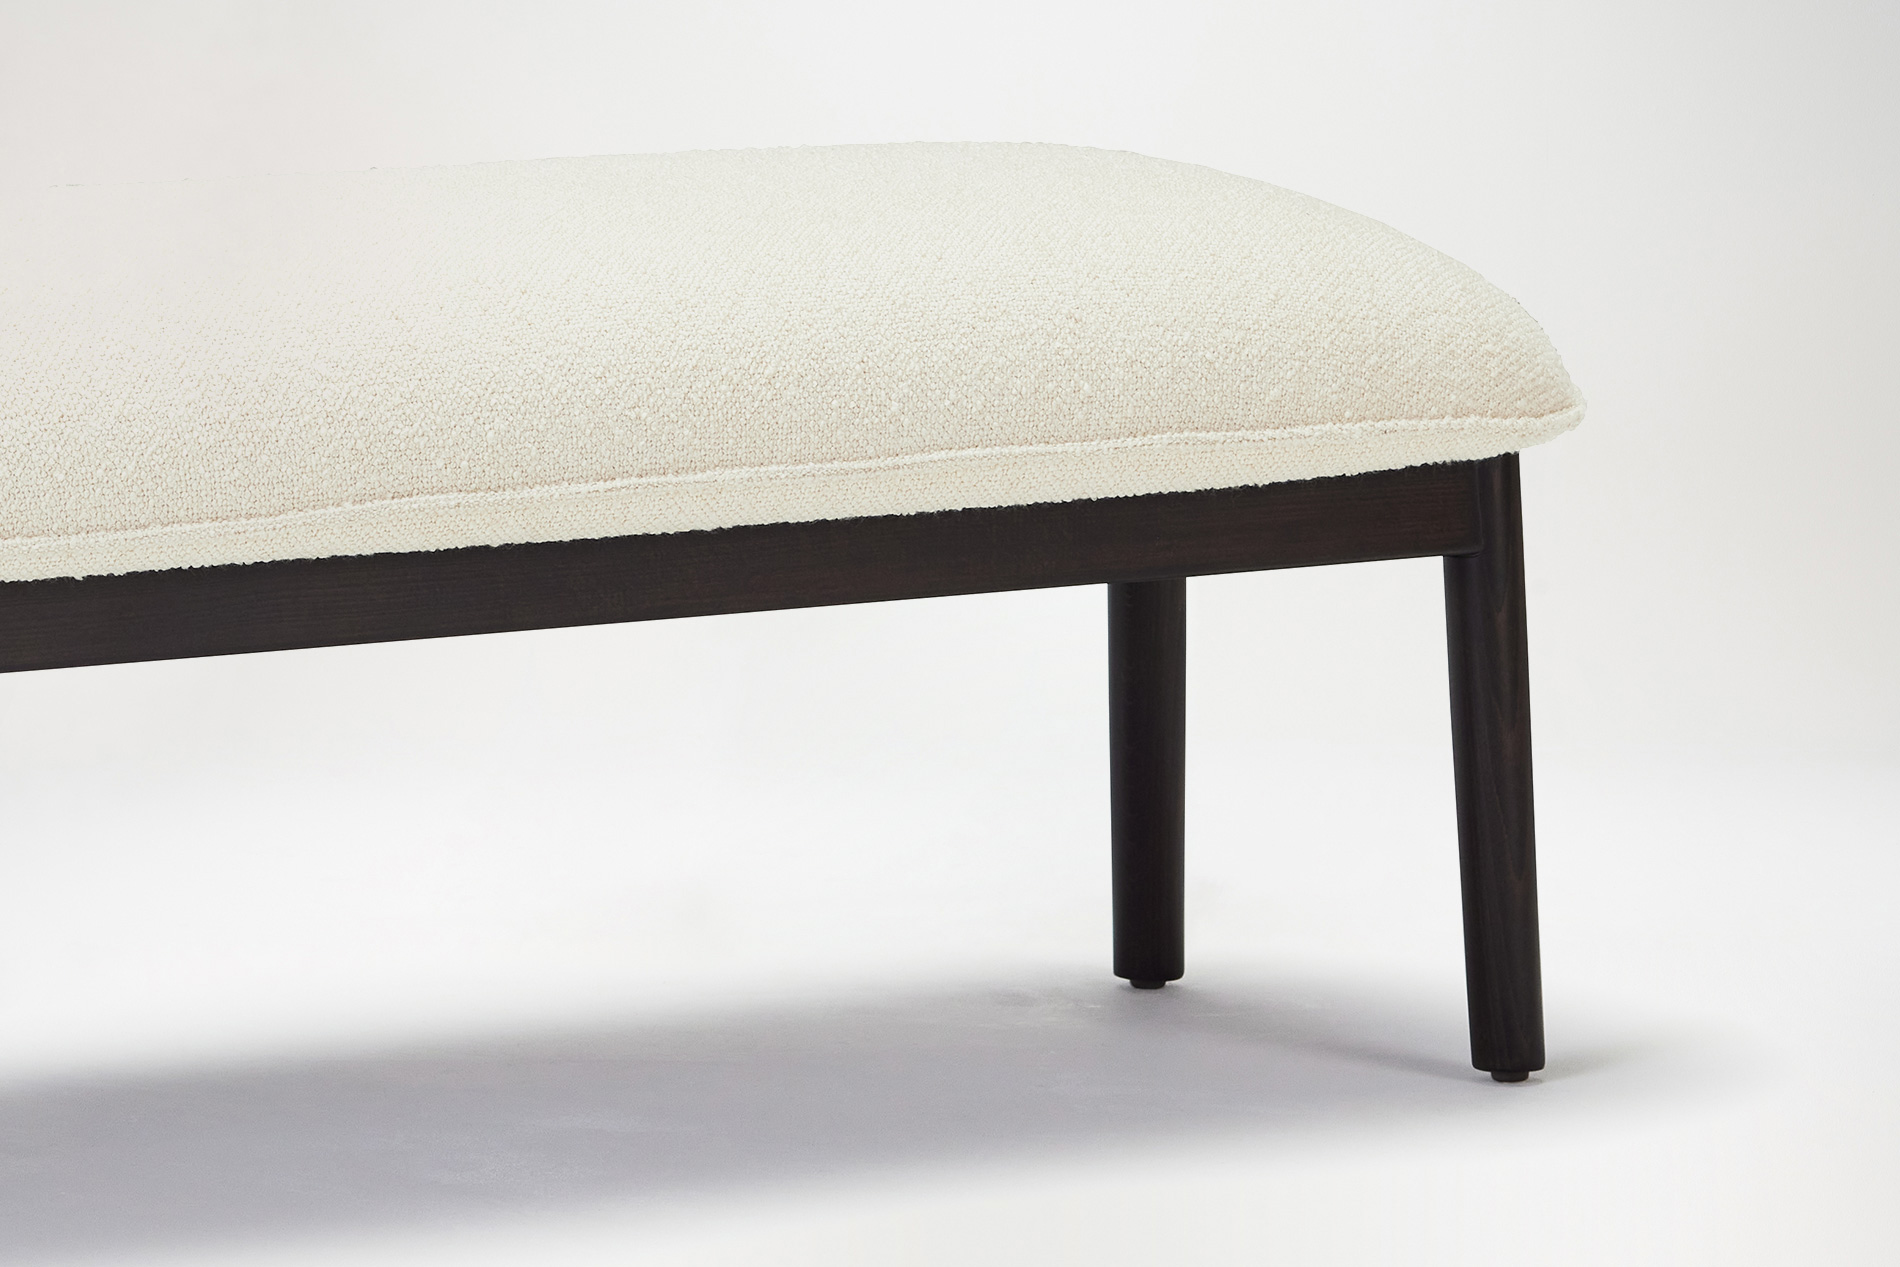 The evolution came very quickly, the idea was very square at first then chamfering the base upholstery gave it a unique looking form.CAROLINA BENCH 